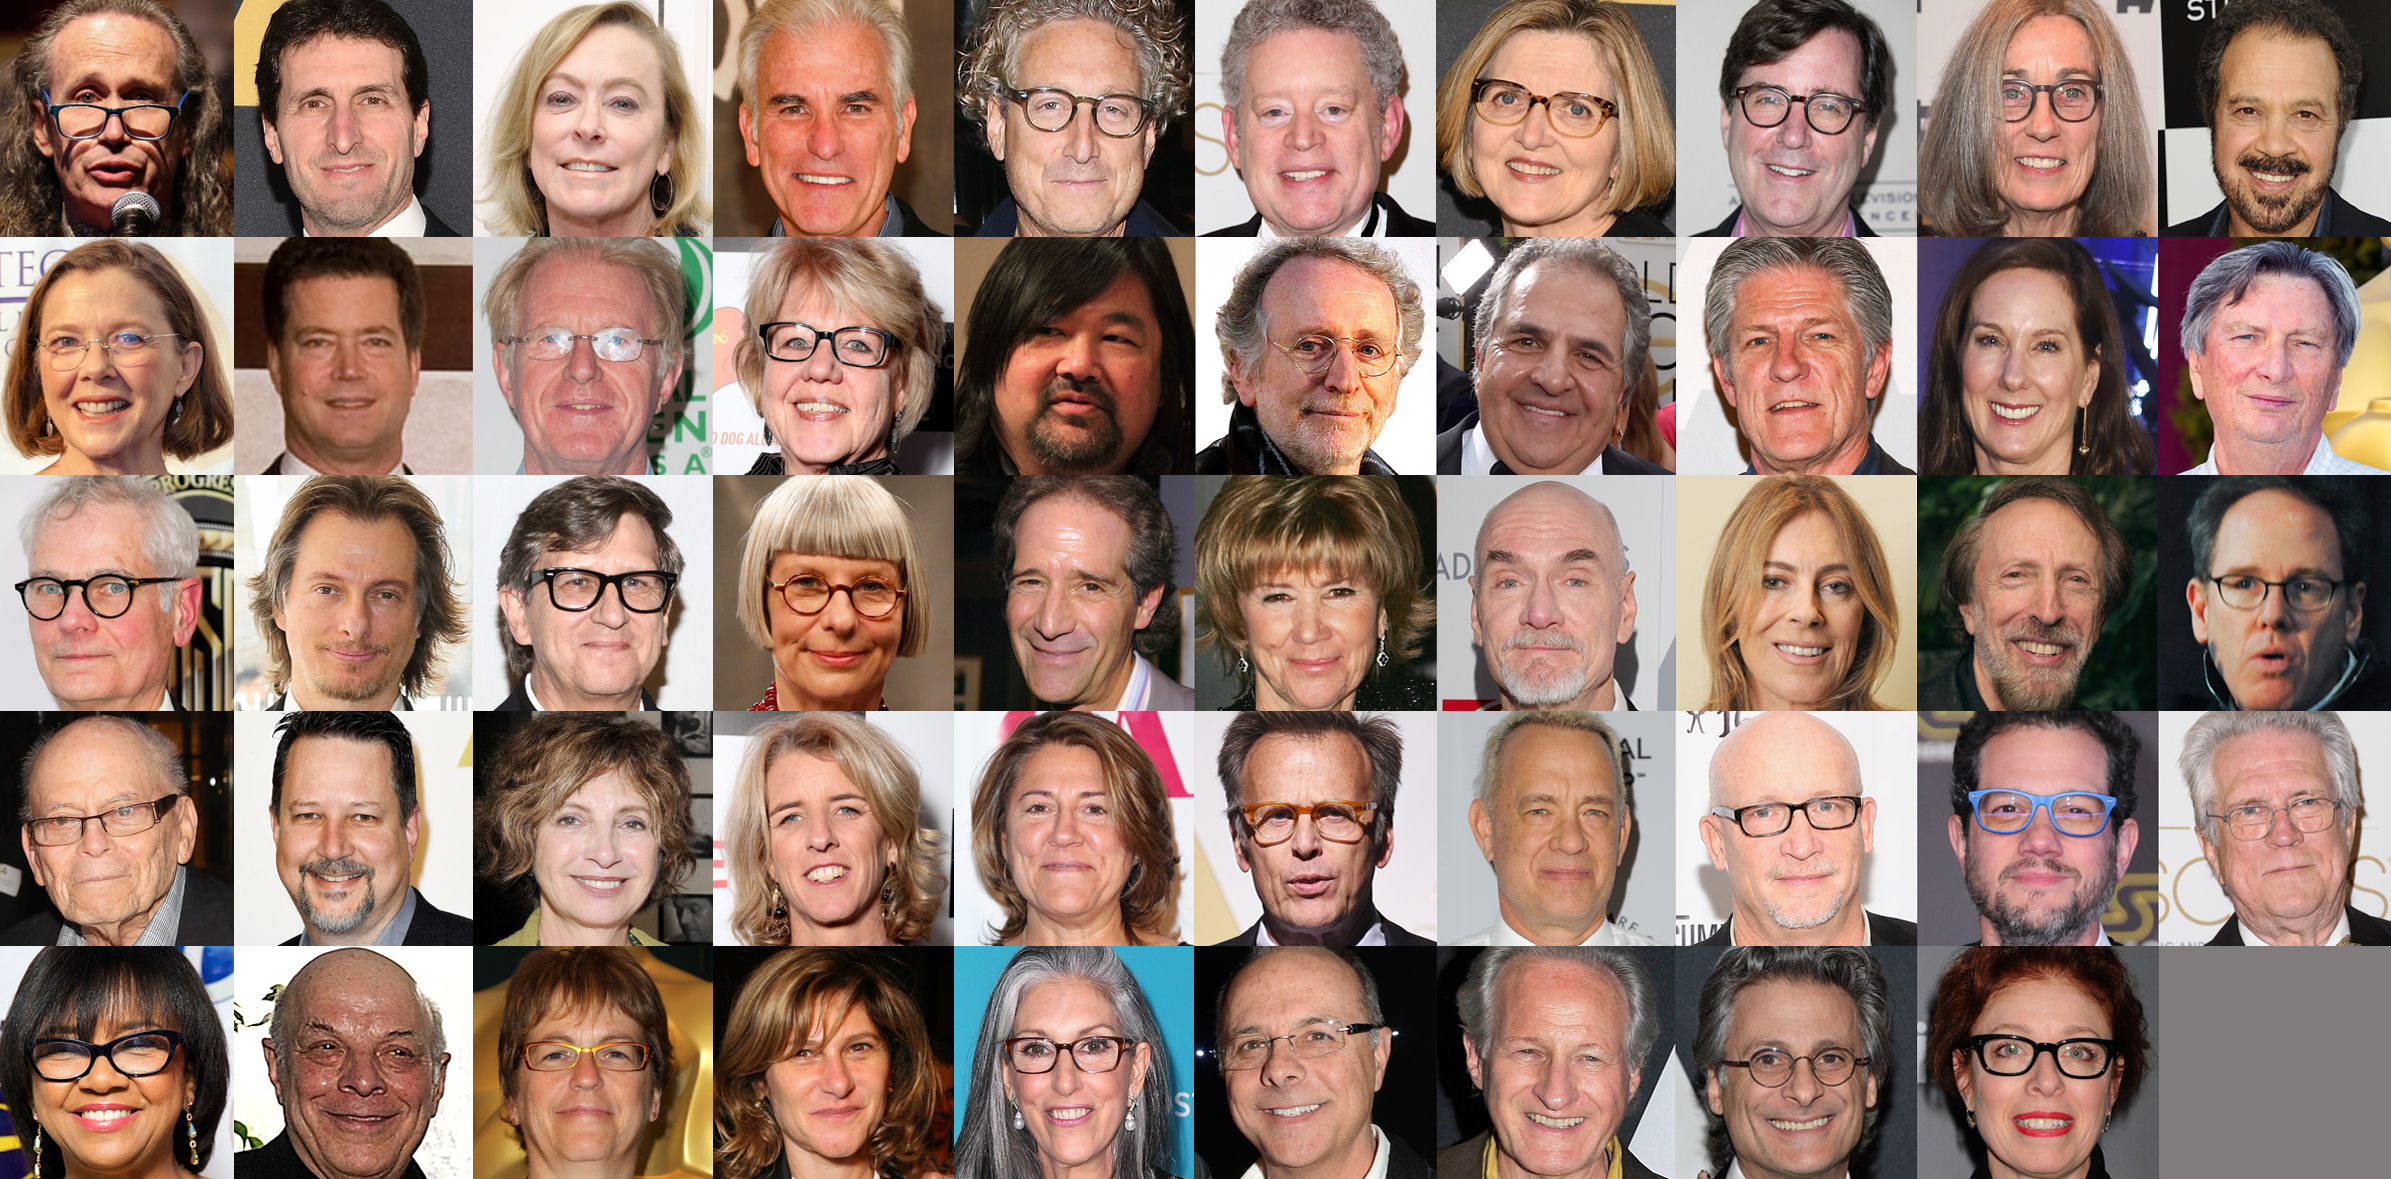 The Academy of Motion Pictures Arts and Sciences Board of Governors is seen here, with the exception of Daniel R. Fellman and Bob Rogers, for whom photos could not be found. (Getty Images; Illustration by Kenneth Bachor for TIME)